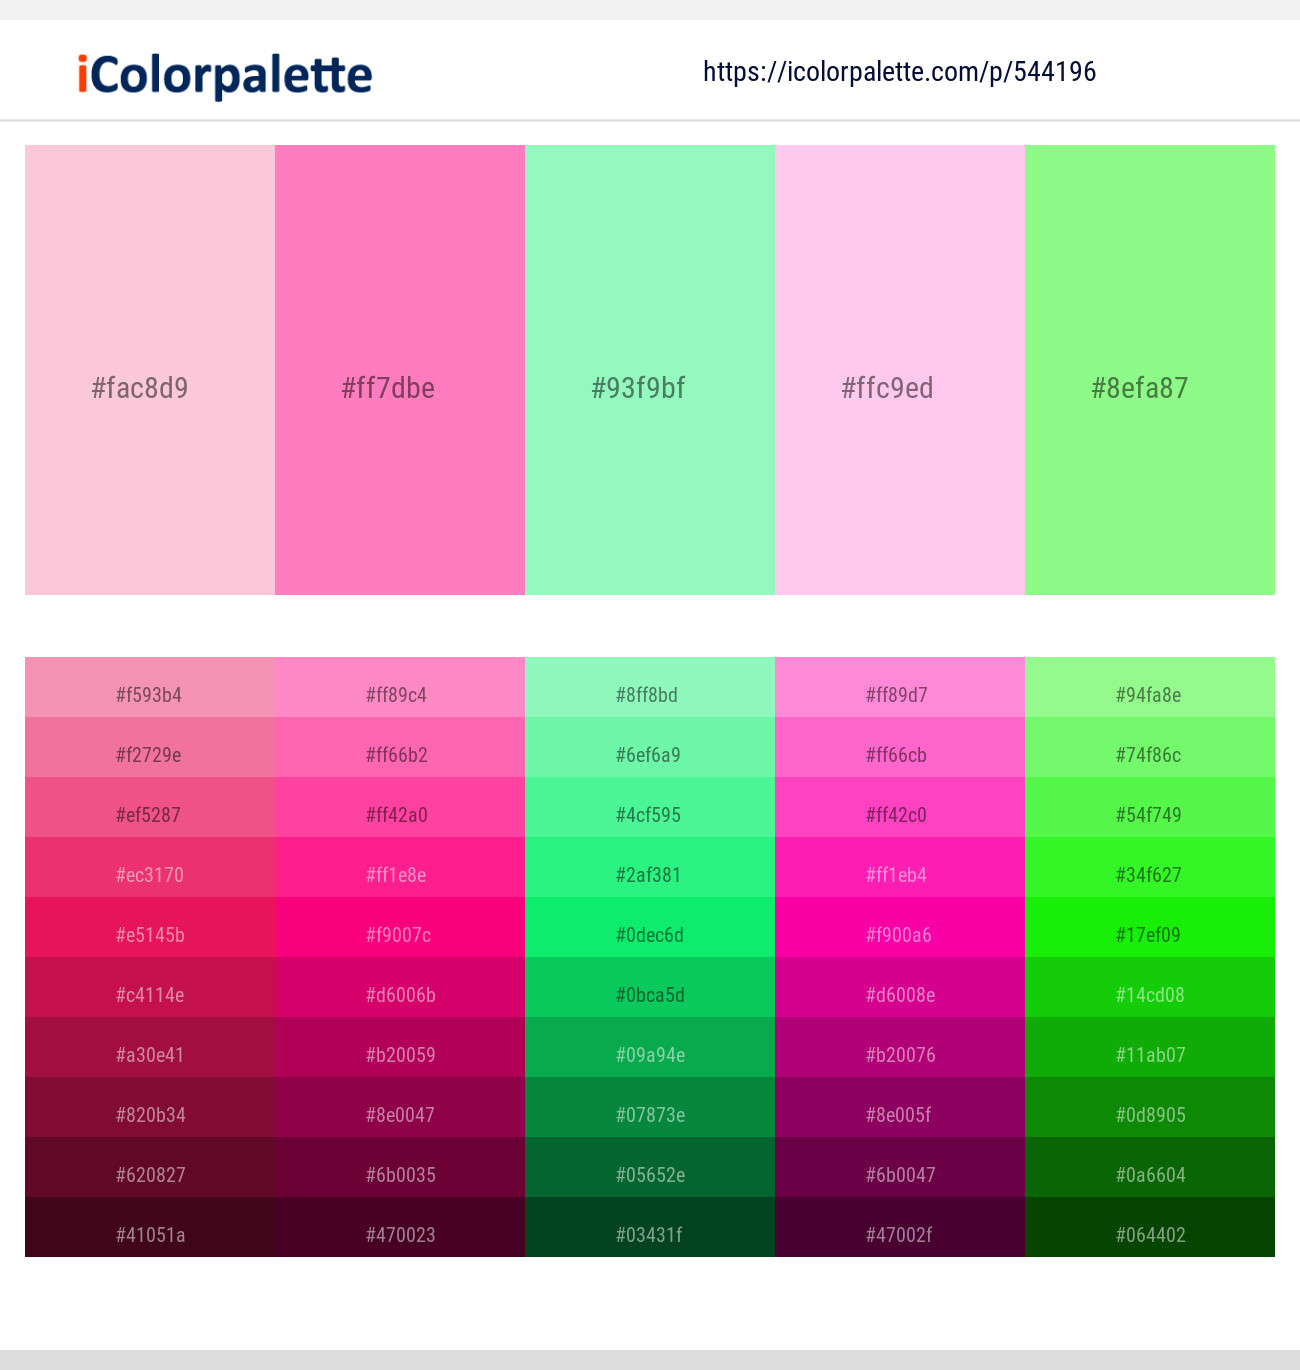 html color codes pink